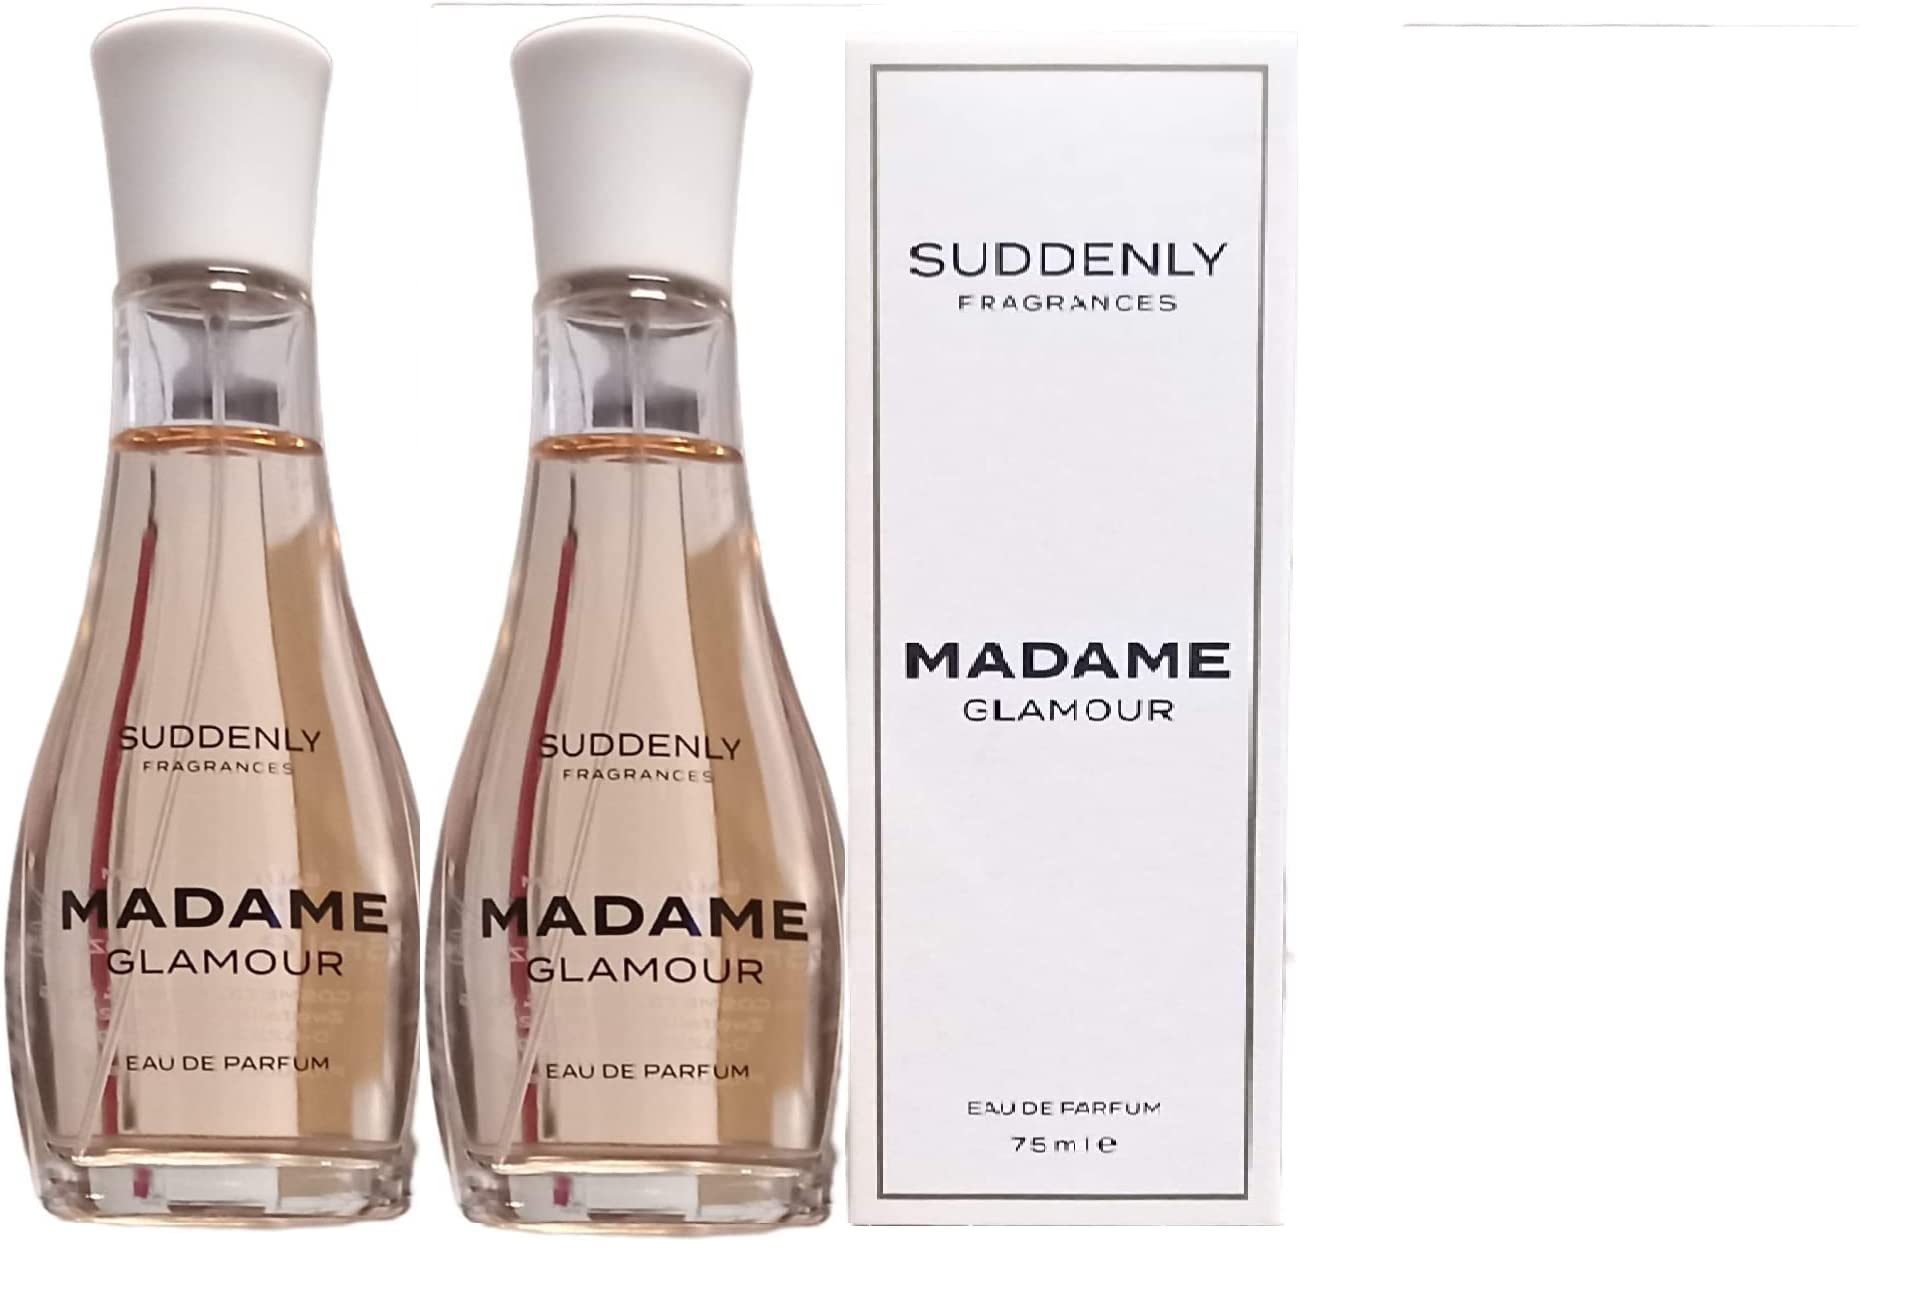 Madame Glamour Suddenly WOMAN DIAMONDS MADAME GLAMOUR PERFUME EAU DE PARFUM ( 2x75ml PACK) made in Germany ????????